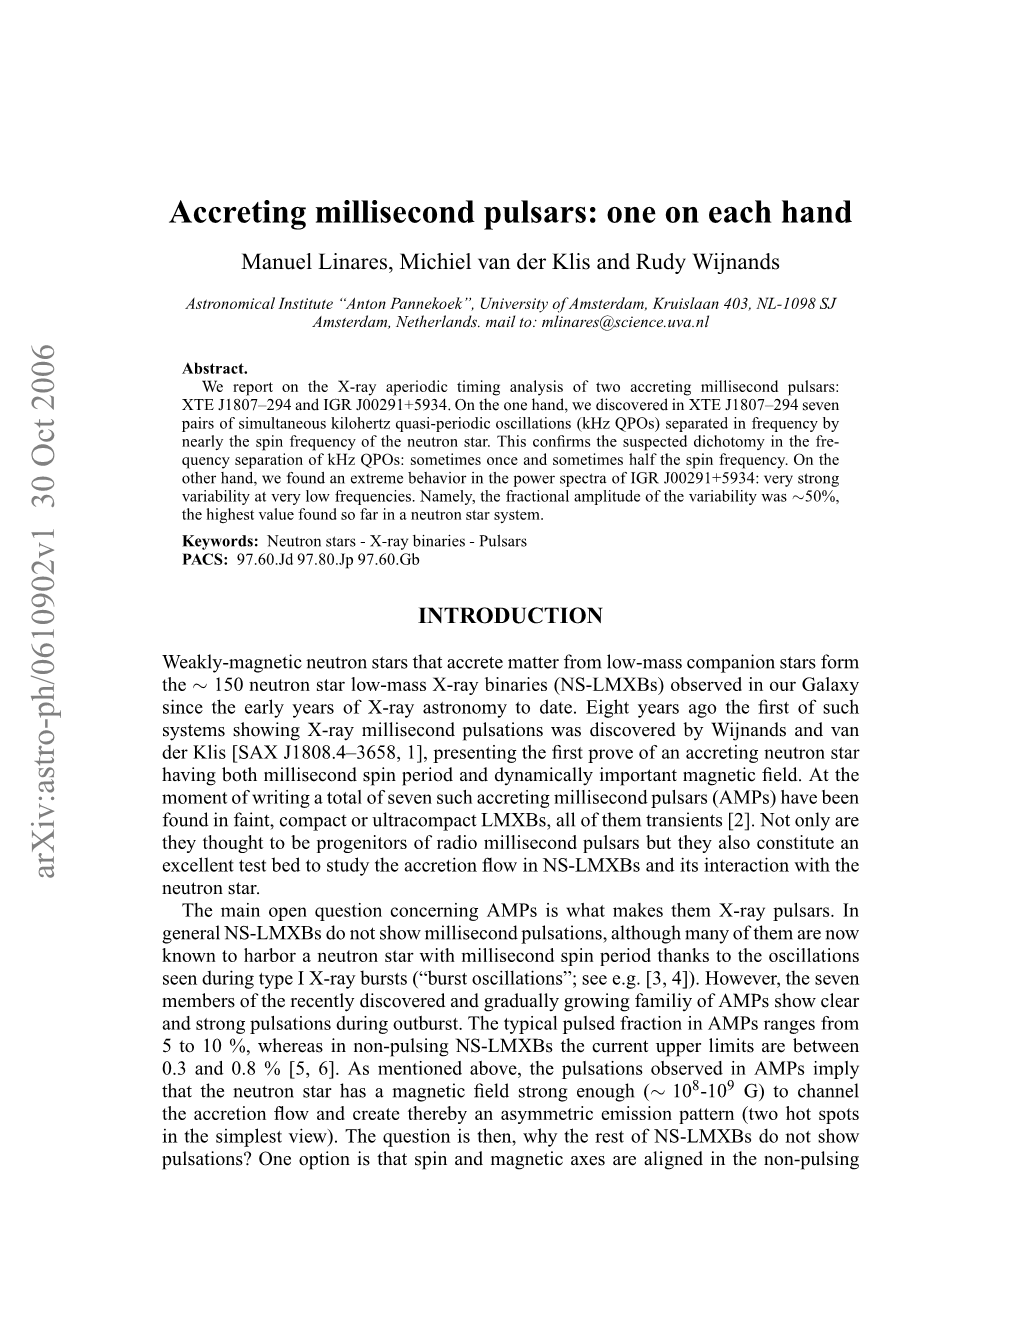 Accreting Millisecond Pulsars: One on Each Hand